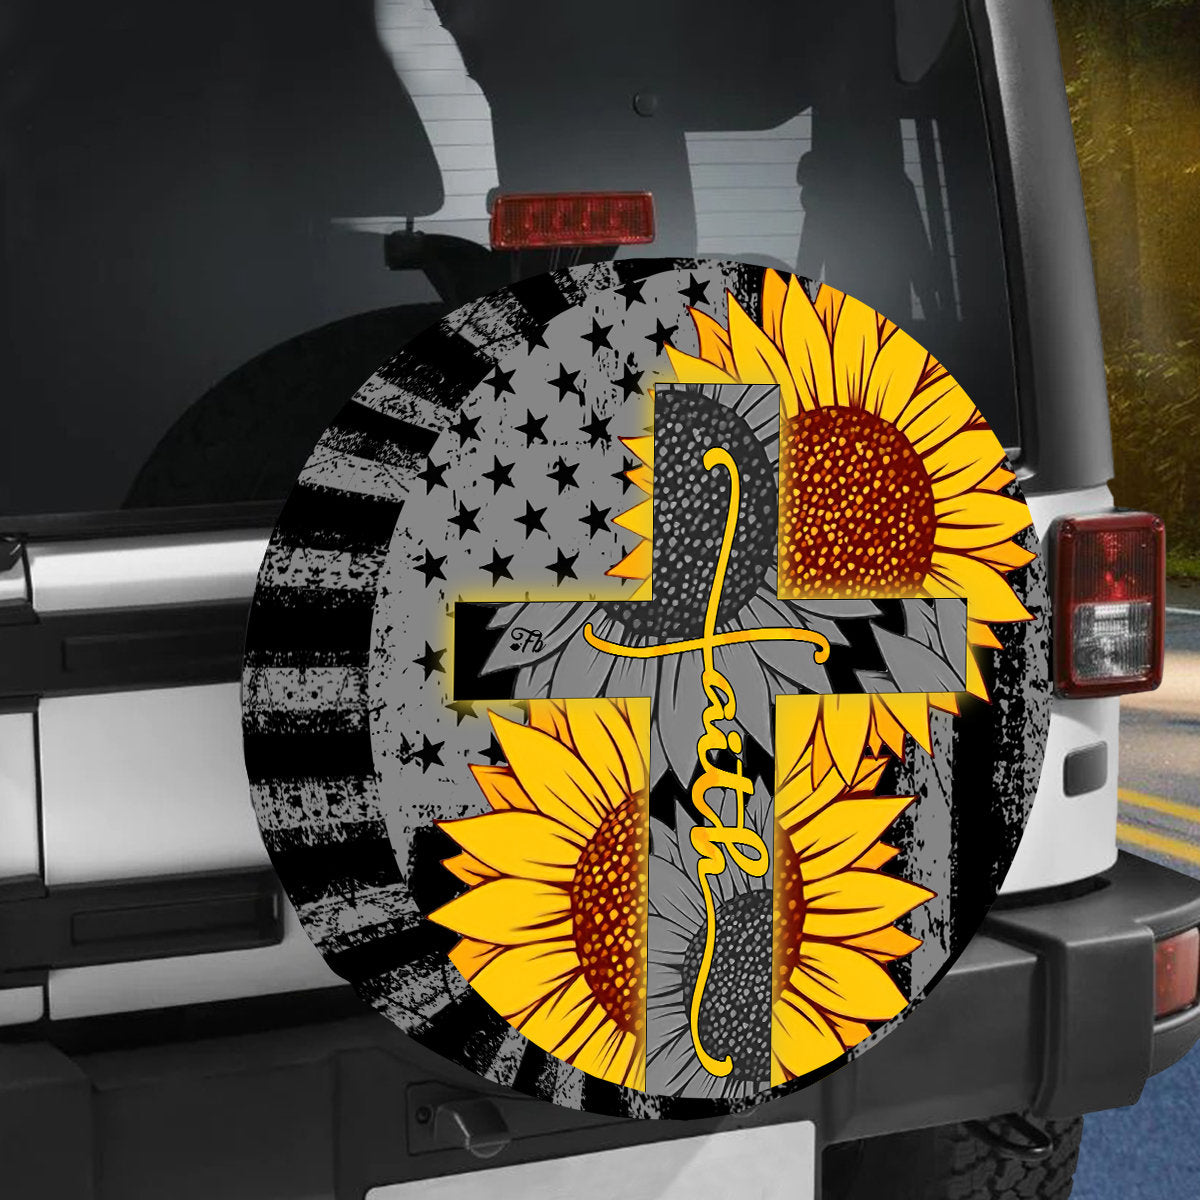 Christ Cross Faith Spare Tire Cover - Cross Sunflower Tire Cover - American Flag Tire Cover Patriot Gift